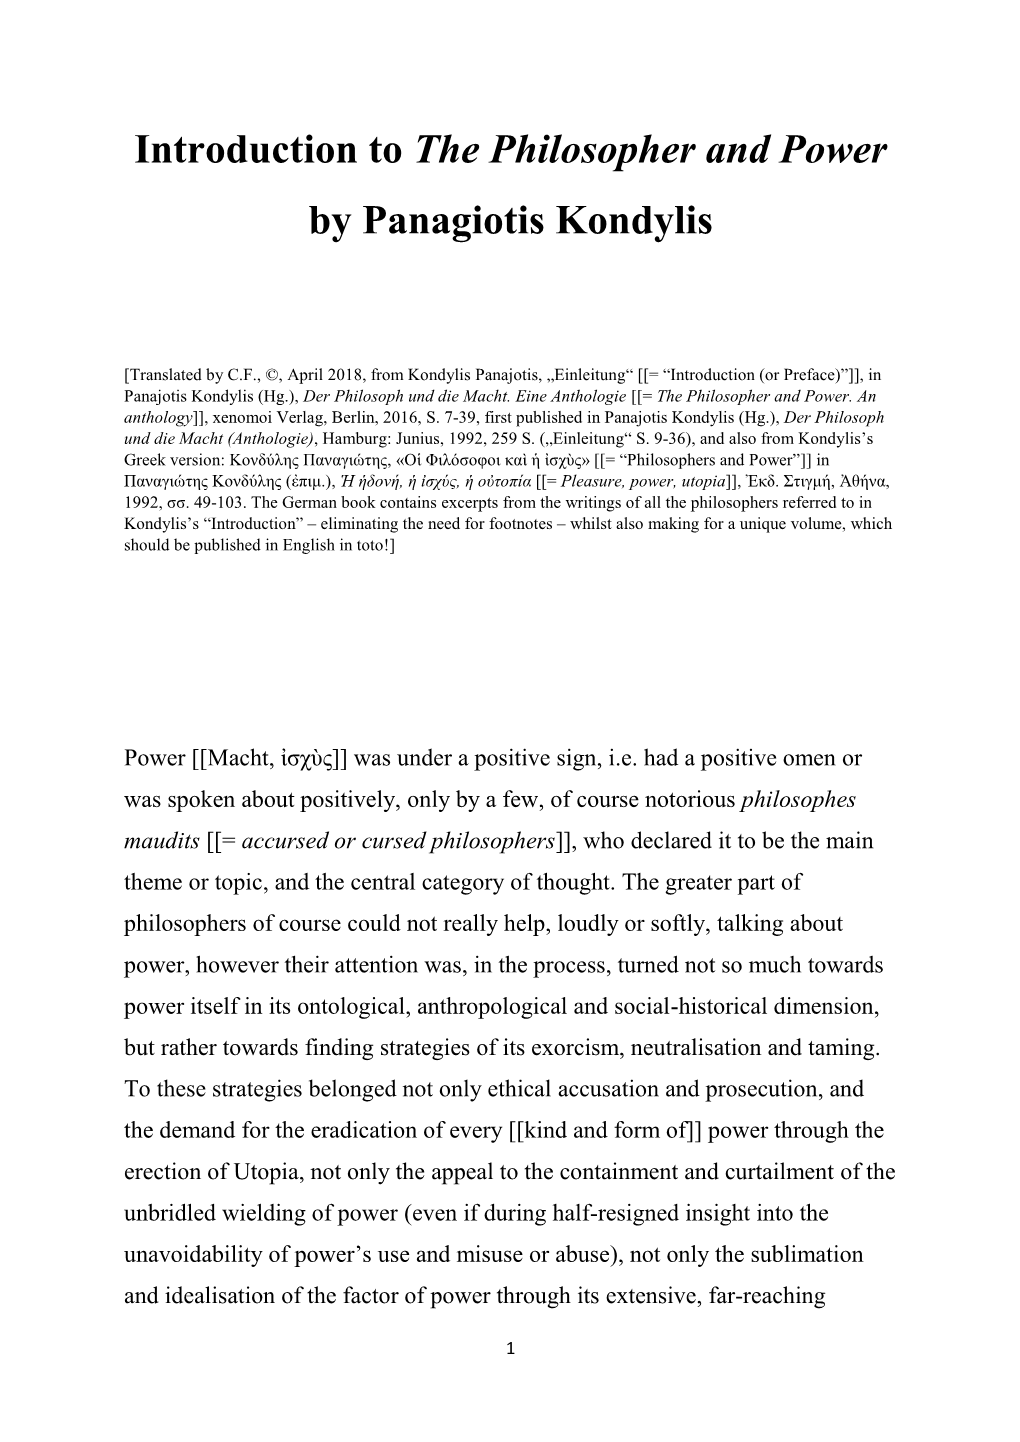 Introduction to the Philosopher and Power by Panagiotis Kondylis